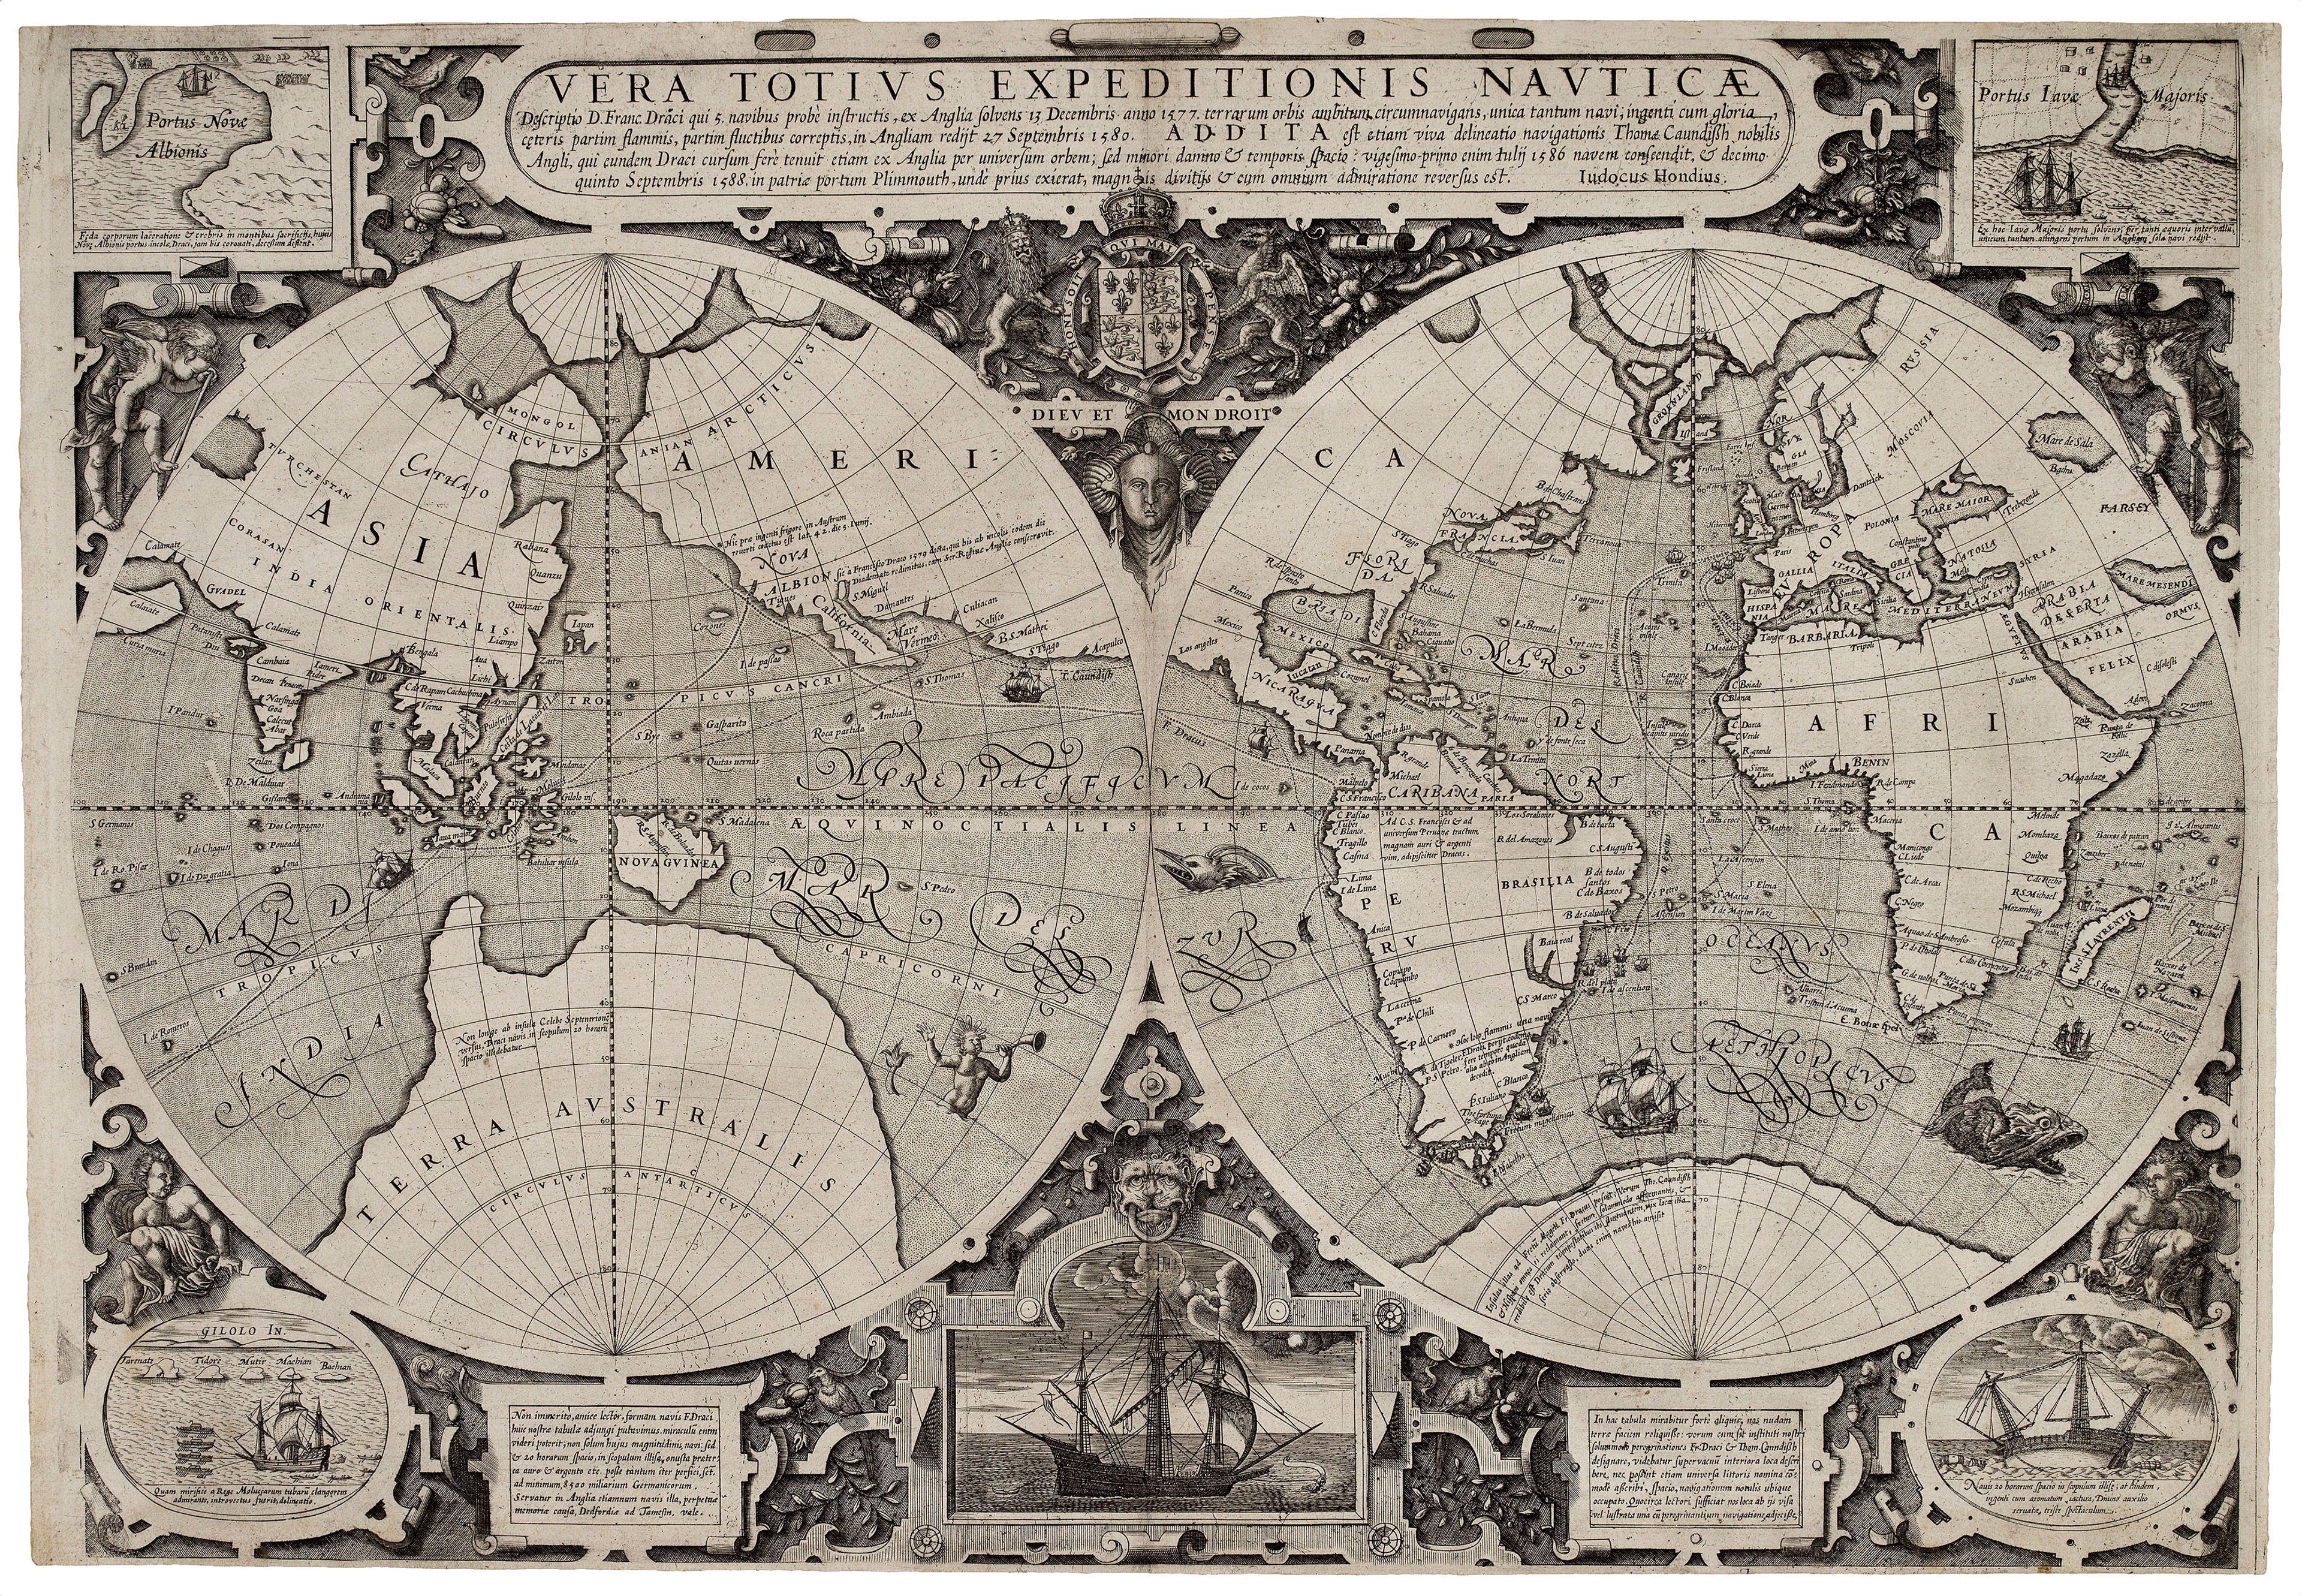 Double-hemisphere projection world map which depicts the voyages of Sir Francis Drake.